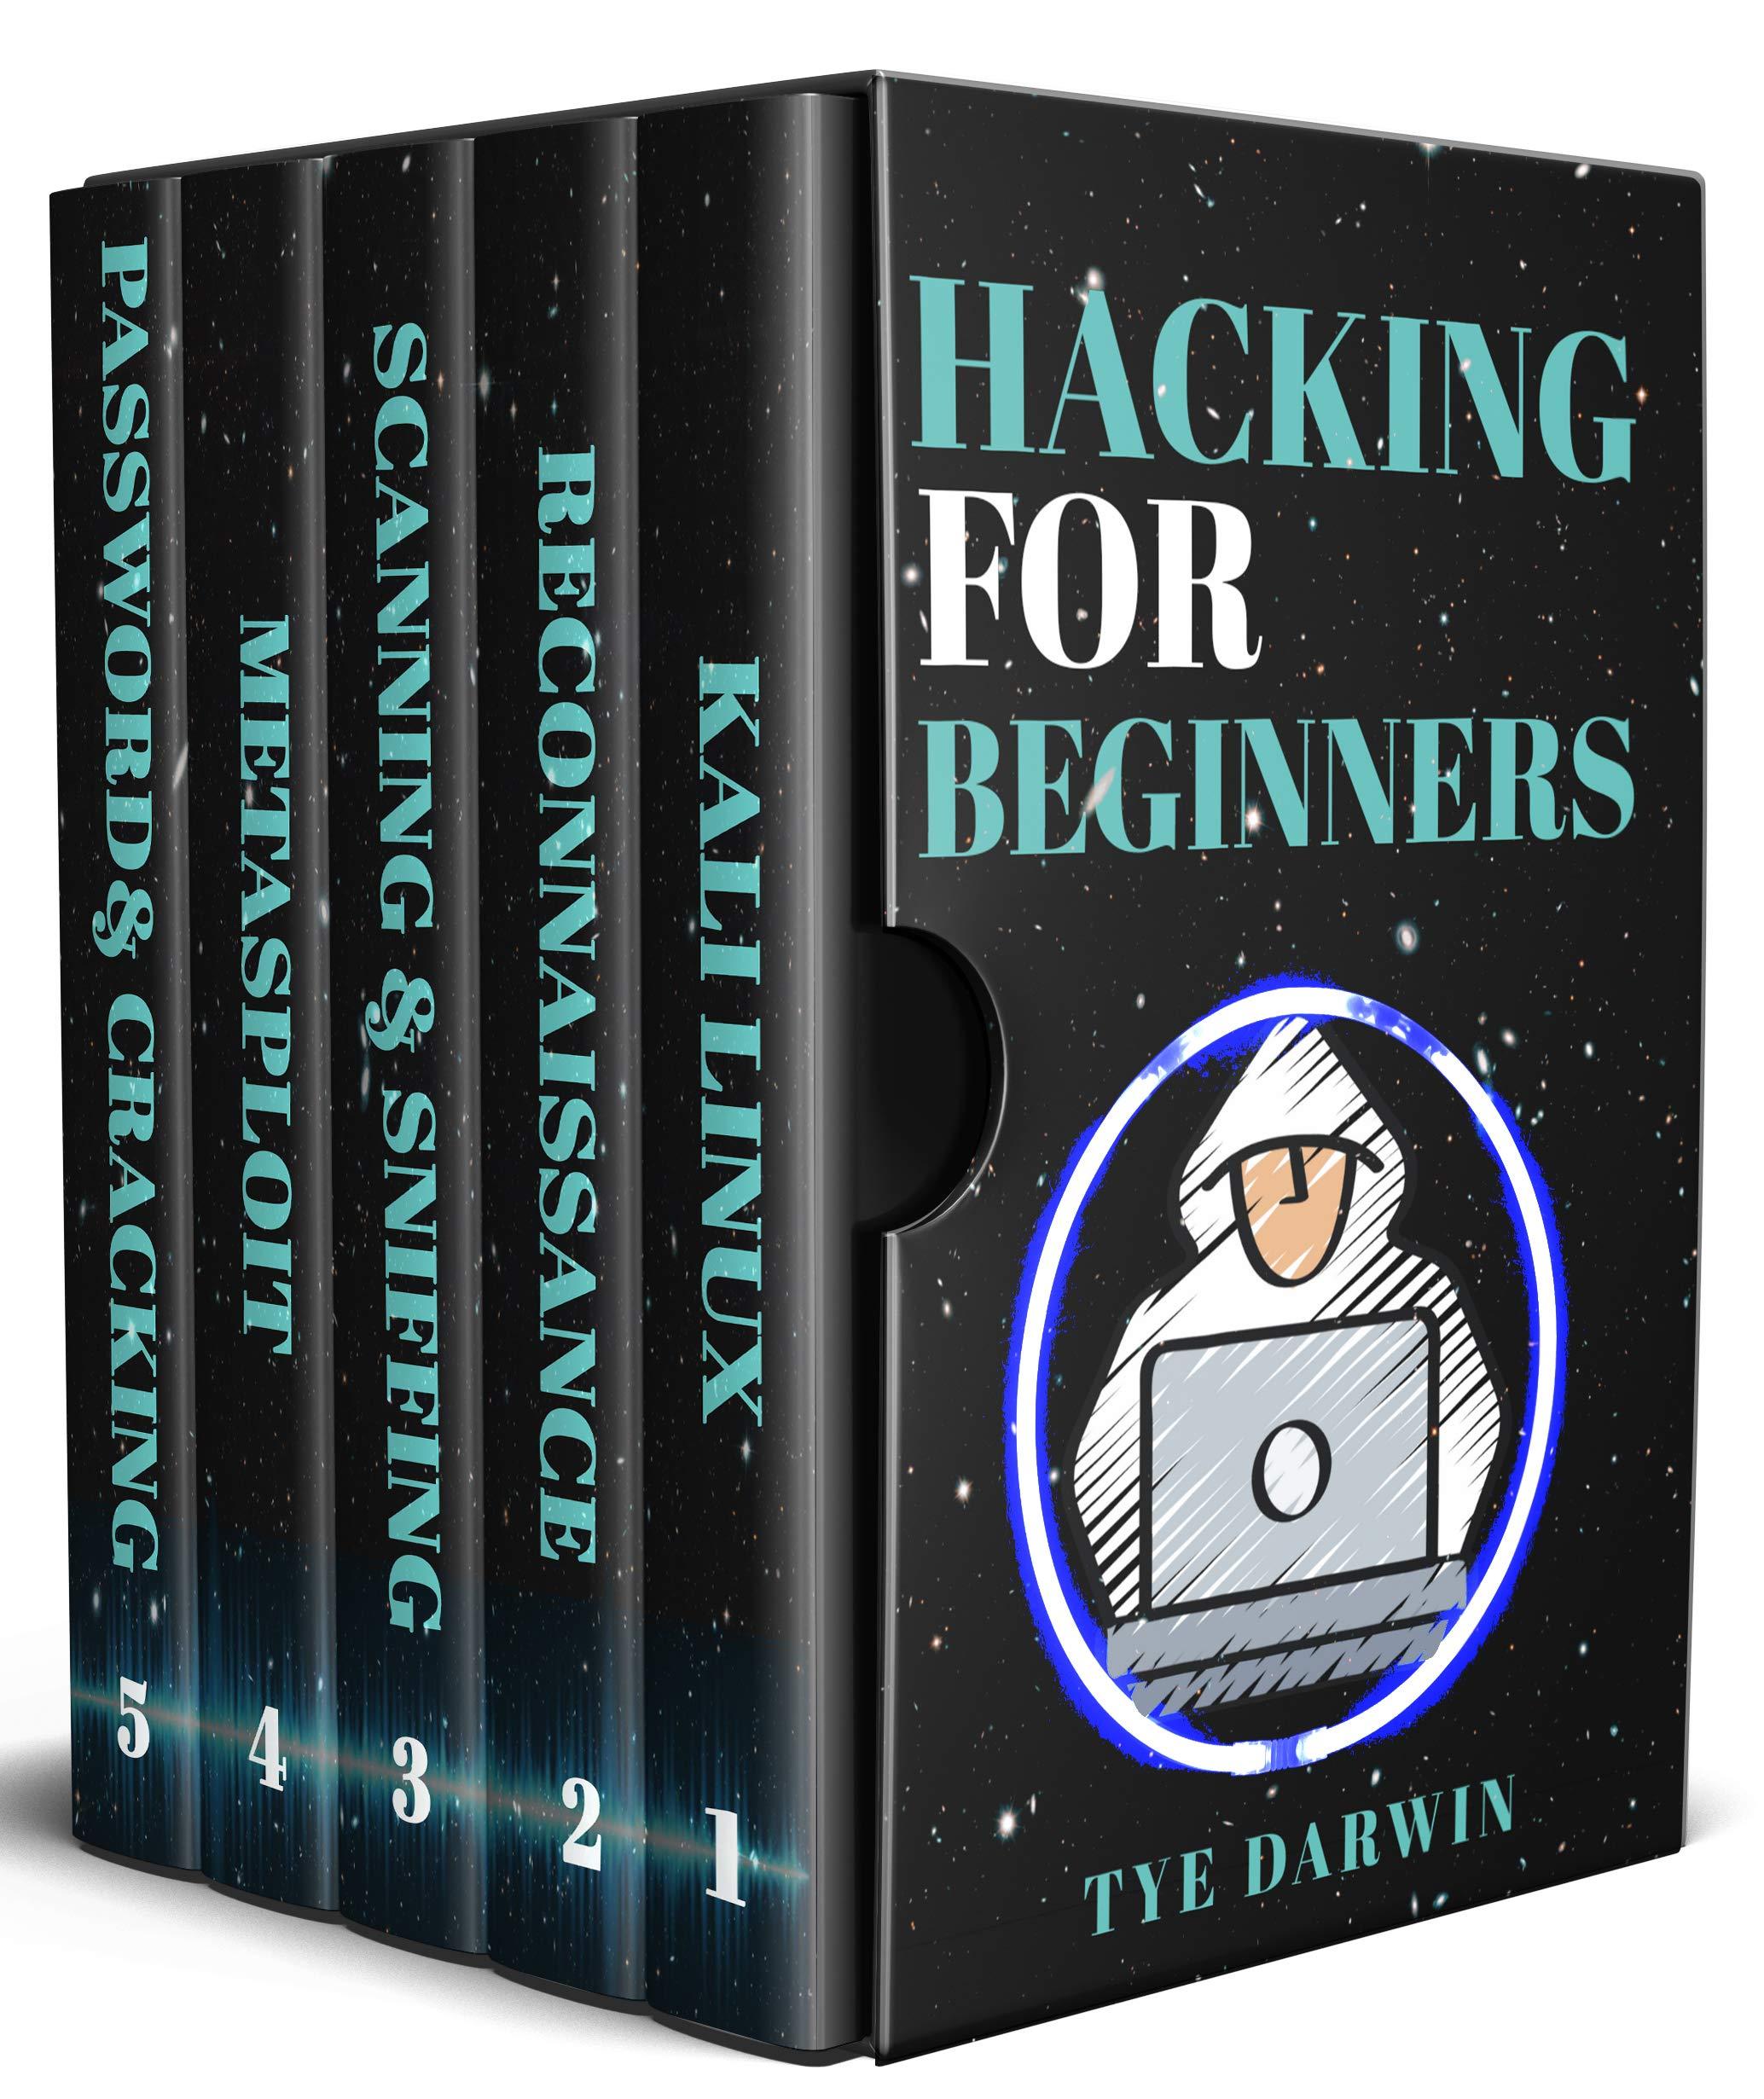 Thumbnail of book Hacking For Beginners With Kali Linux: Learn Kali Linux And Master Tools To Crack Websites, Wireless Networks And Earn Income (5 In 1 Book Set) cover